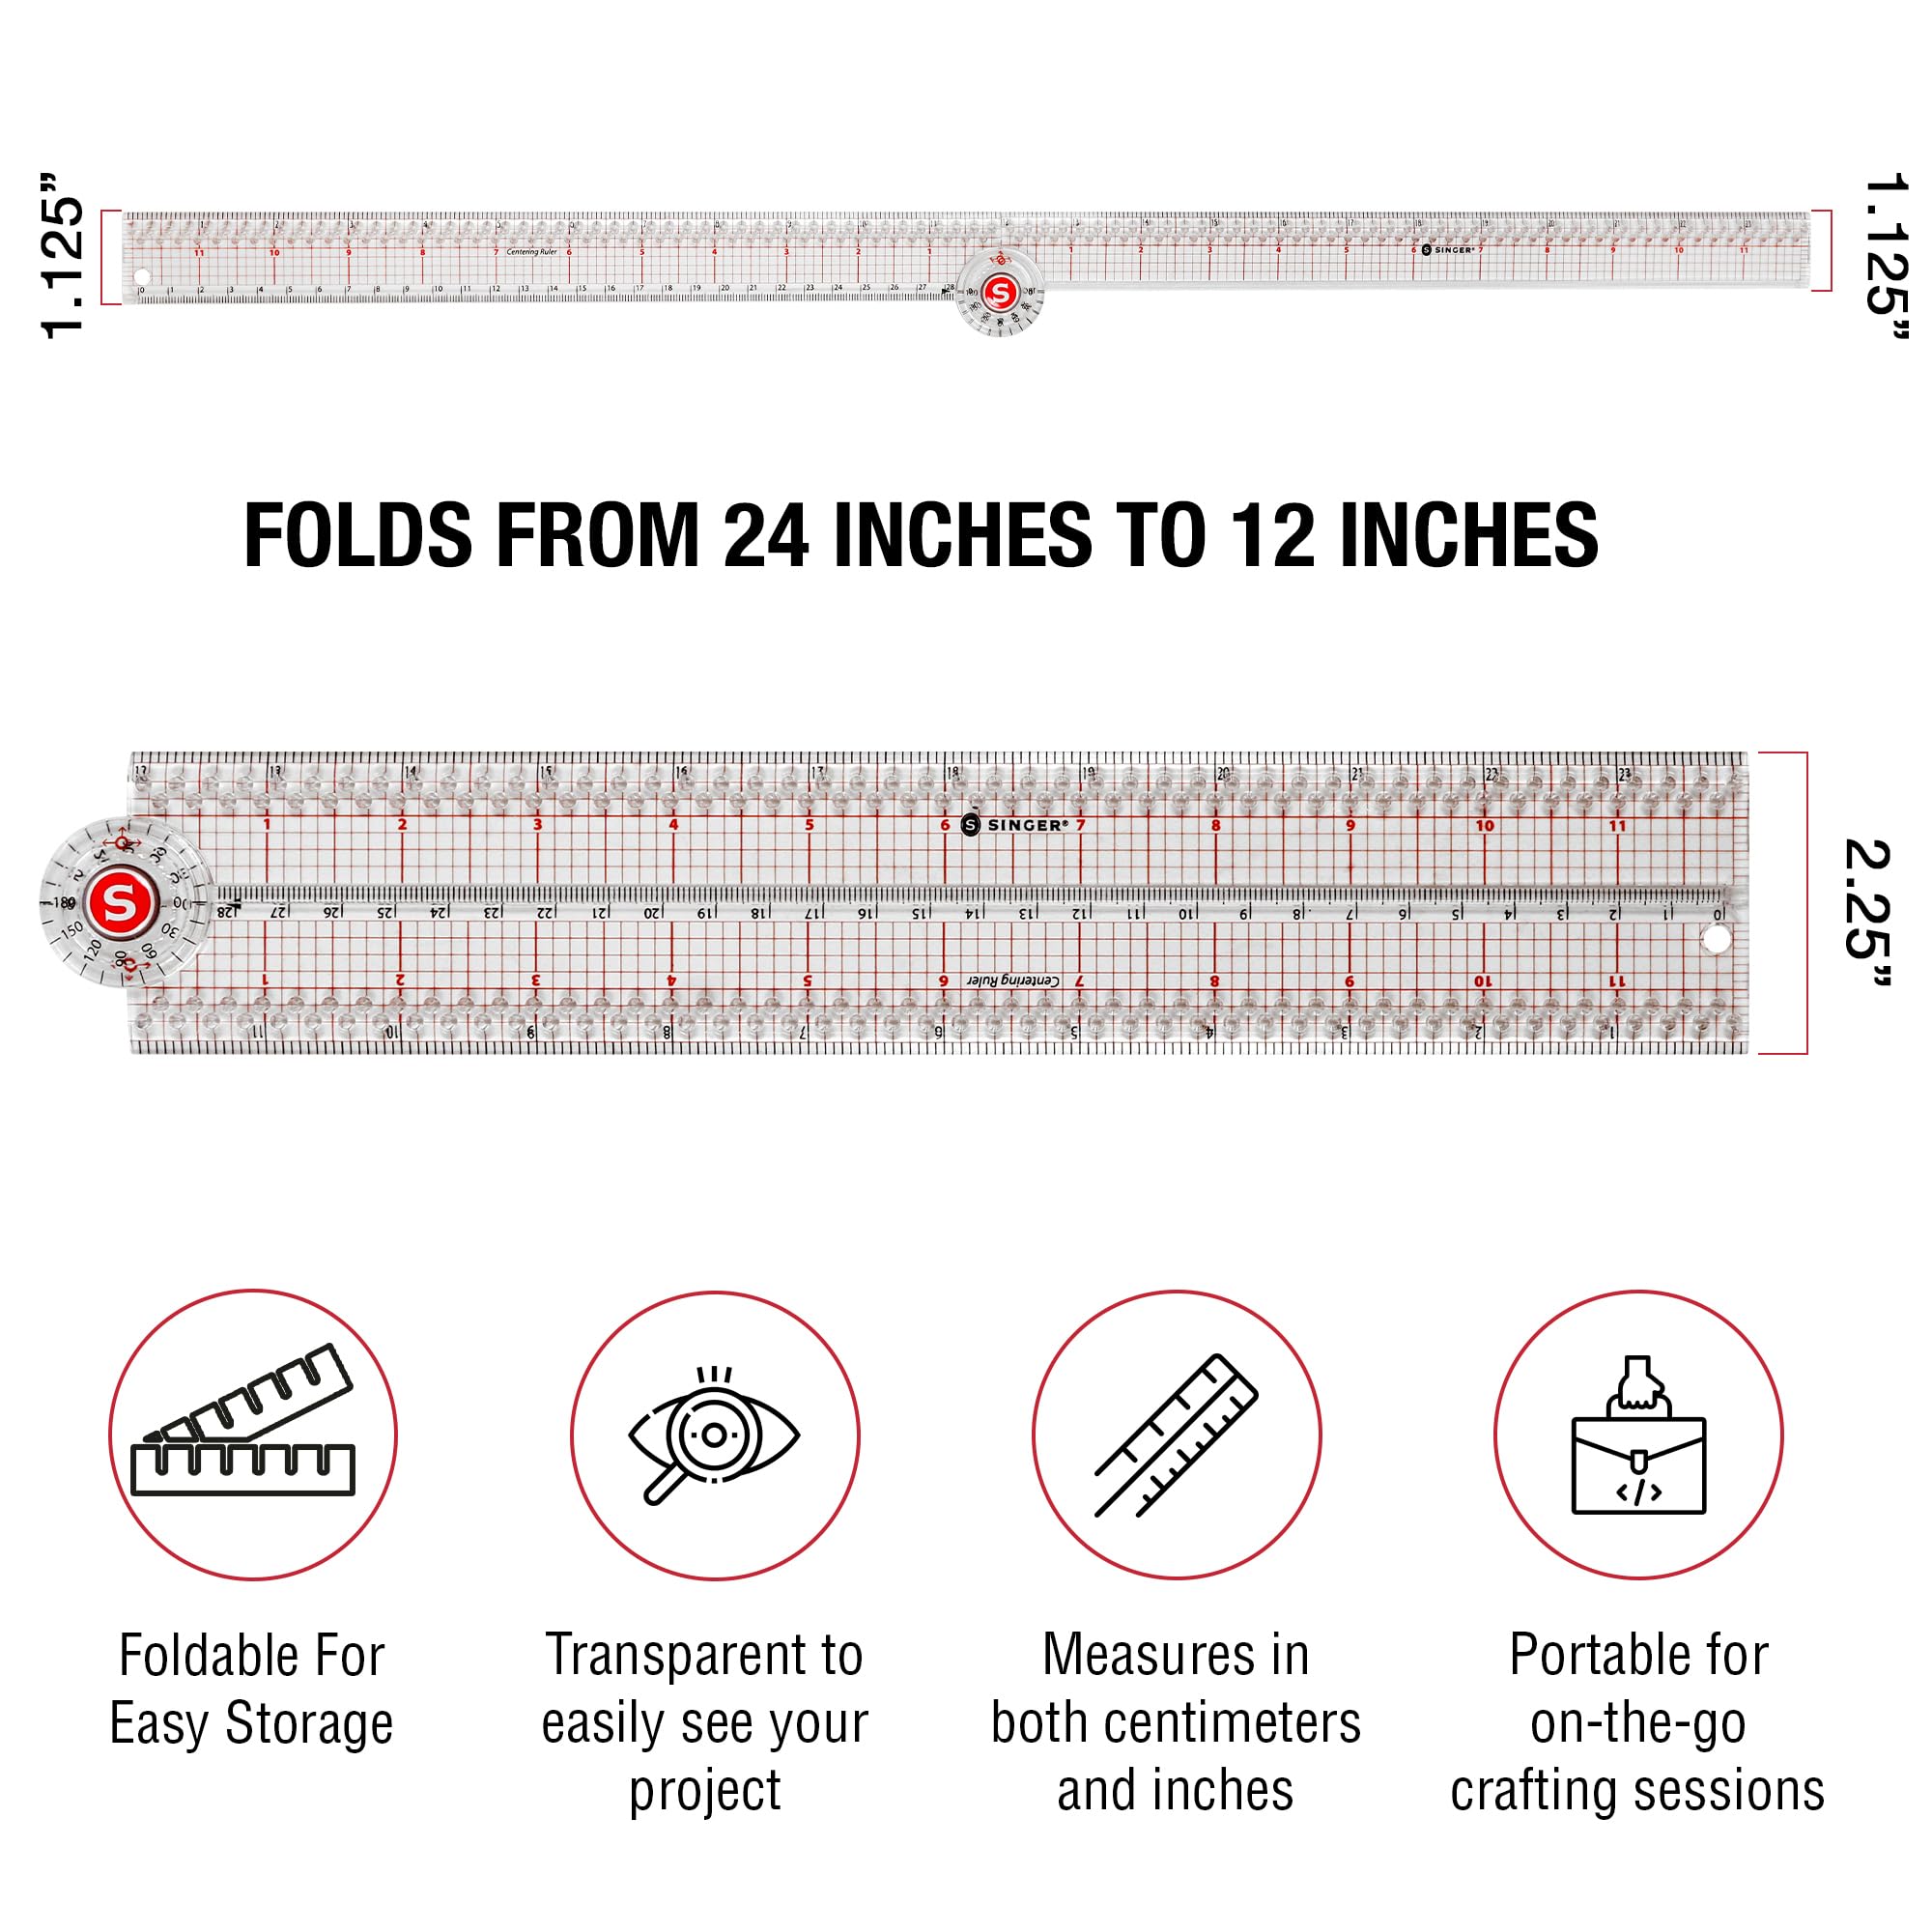 SINGER 24-Inch Folding Ruler with Precision Marking & Grid Lines for Sewing, Quilting, Crafting & Patternmaking - Clear Metric Ruler - Zero-Centering, 15 Increment Quick Angle Ruler, Folds to 12”